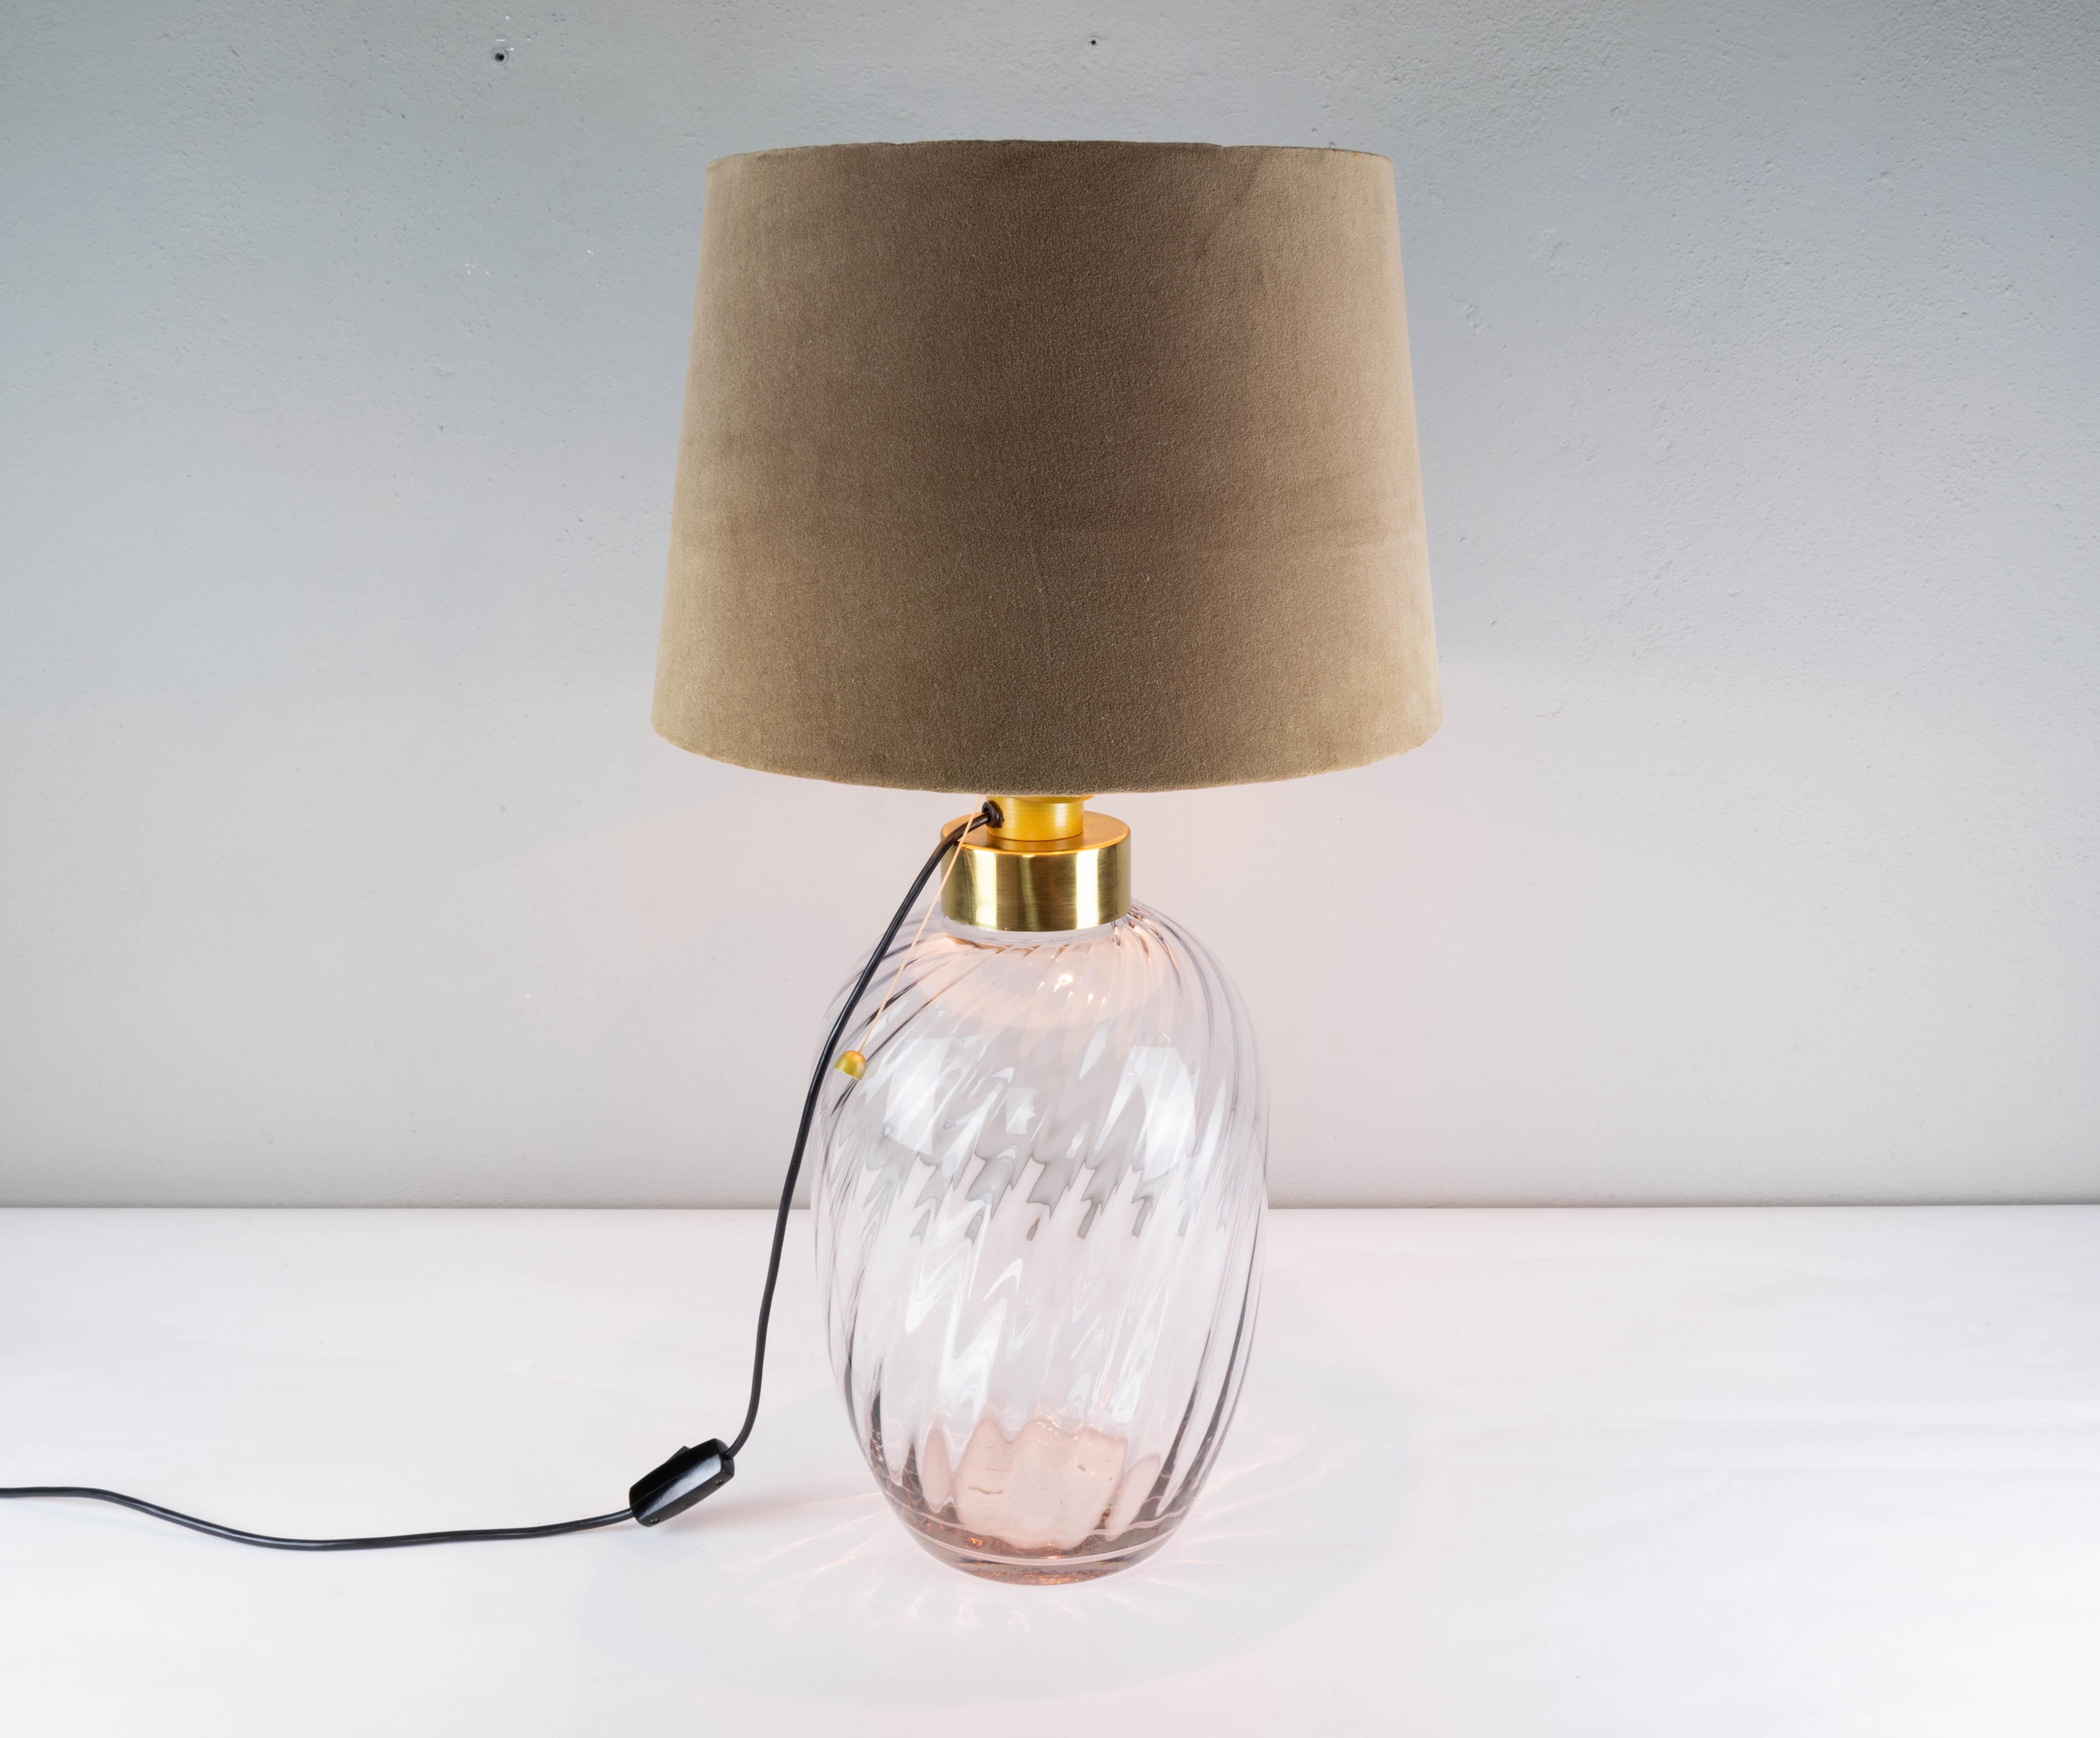 Late 20th Century Mid-Century Modern Blown Glass and Brass Table Lamp Lumica Spain, 1970 For Sale